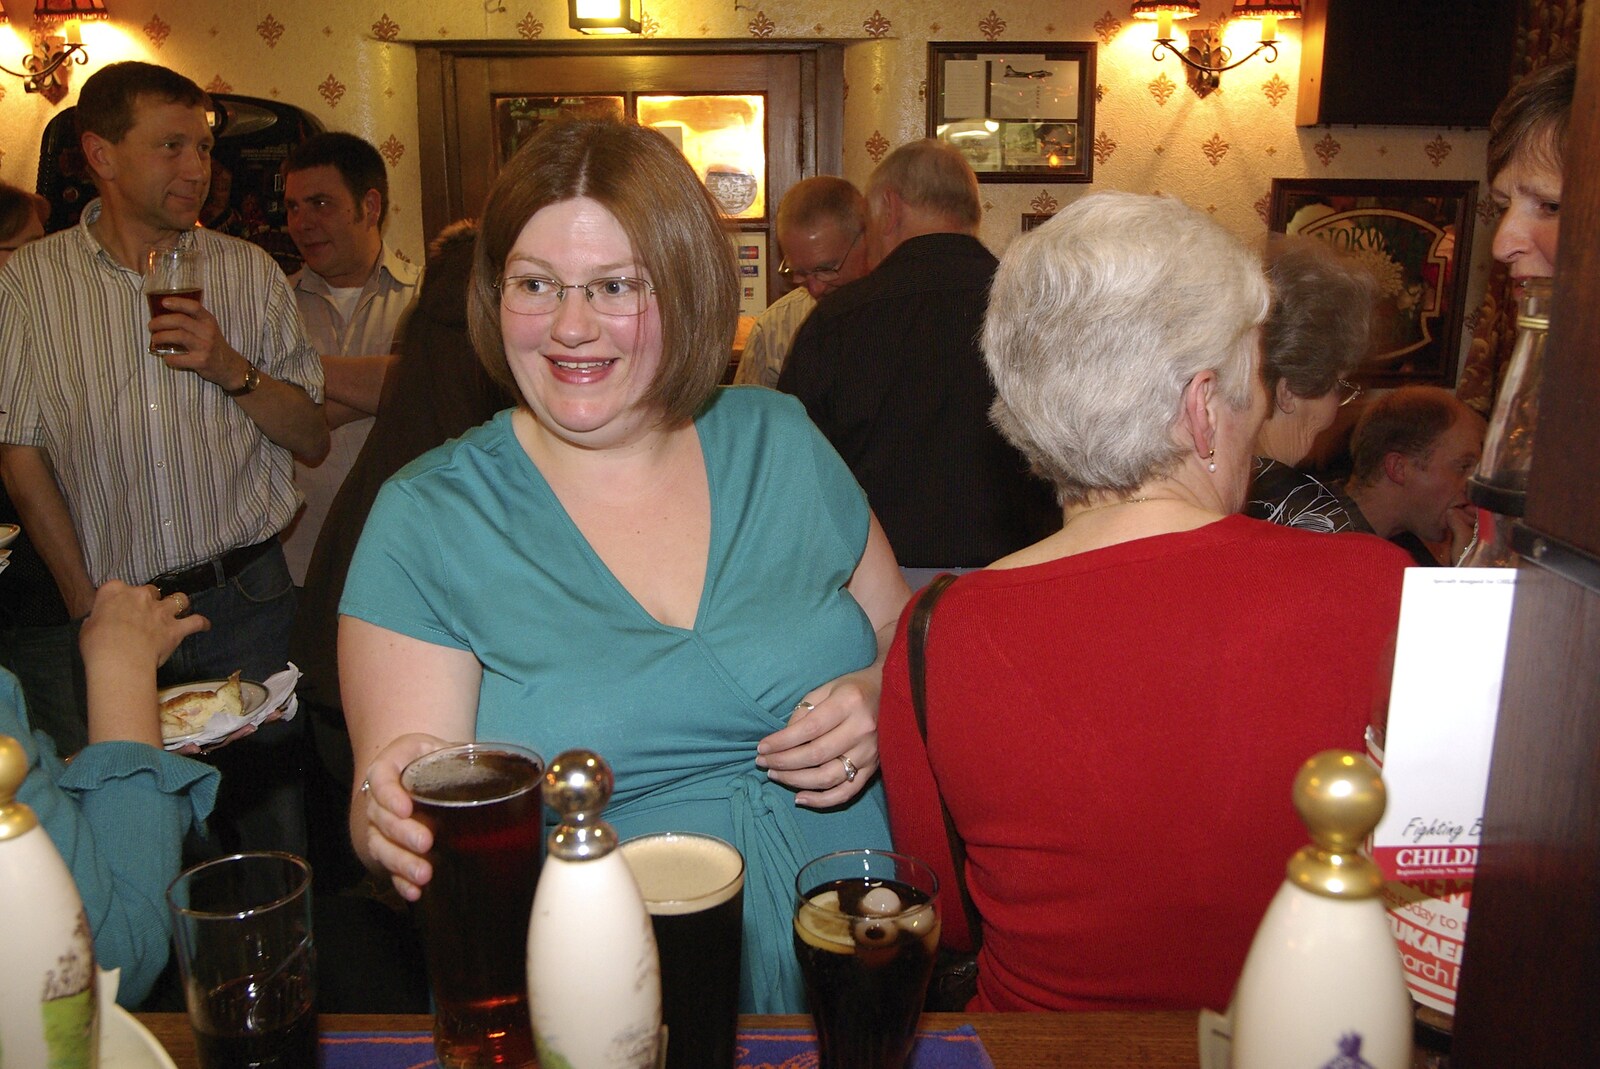 Helen at the bar from The Swan's 25th Anniversary, Brome, Suffolk - 14th November 2008